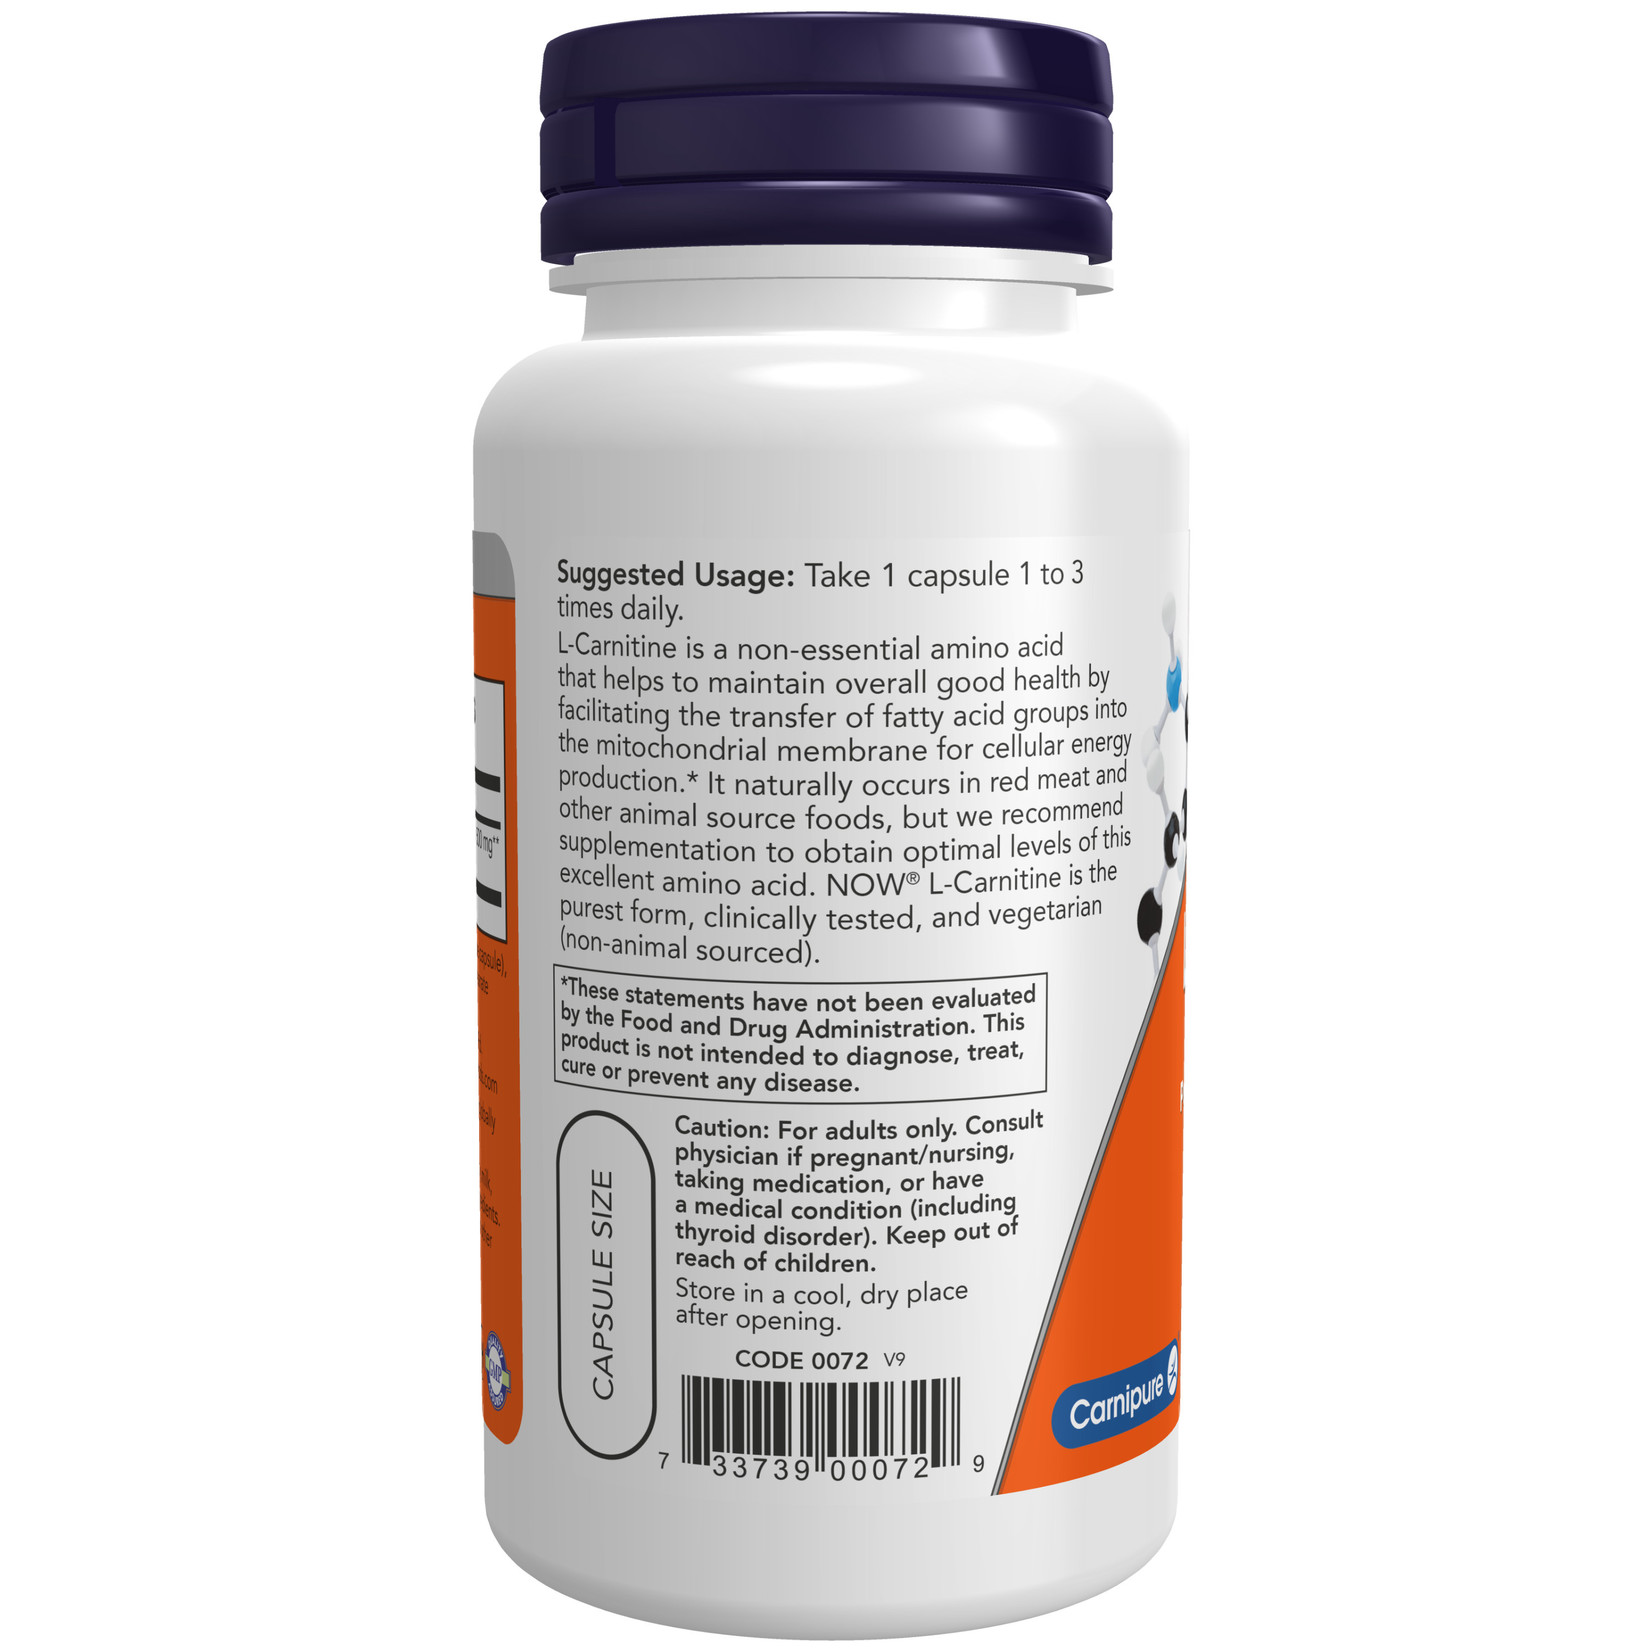 Now Now - Carnitine 500mg - 60 Capsules